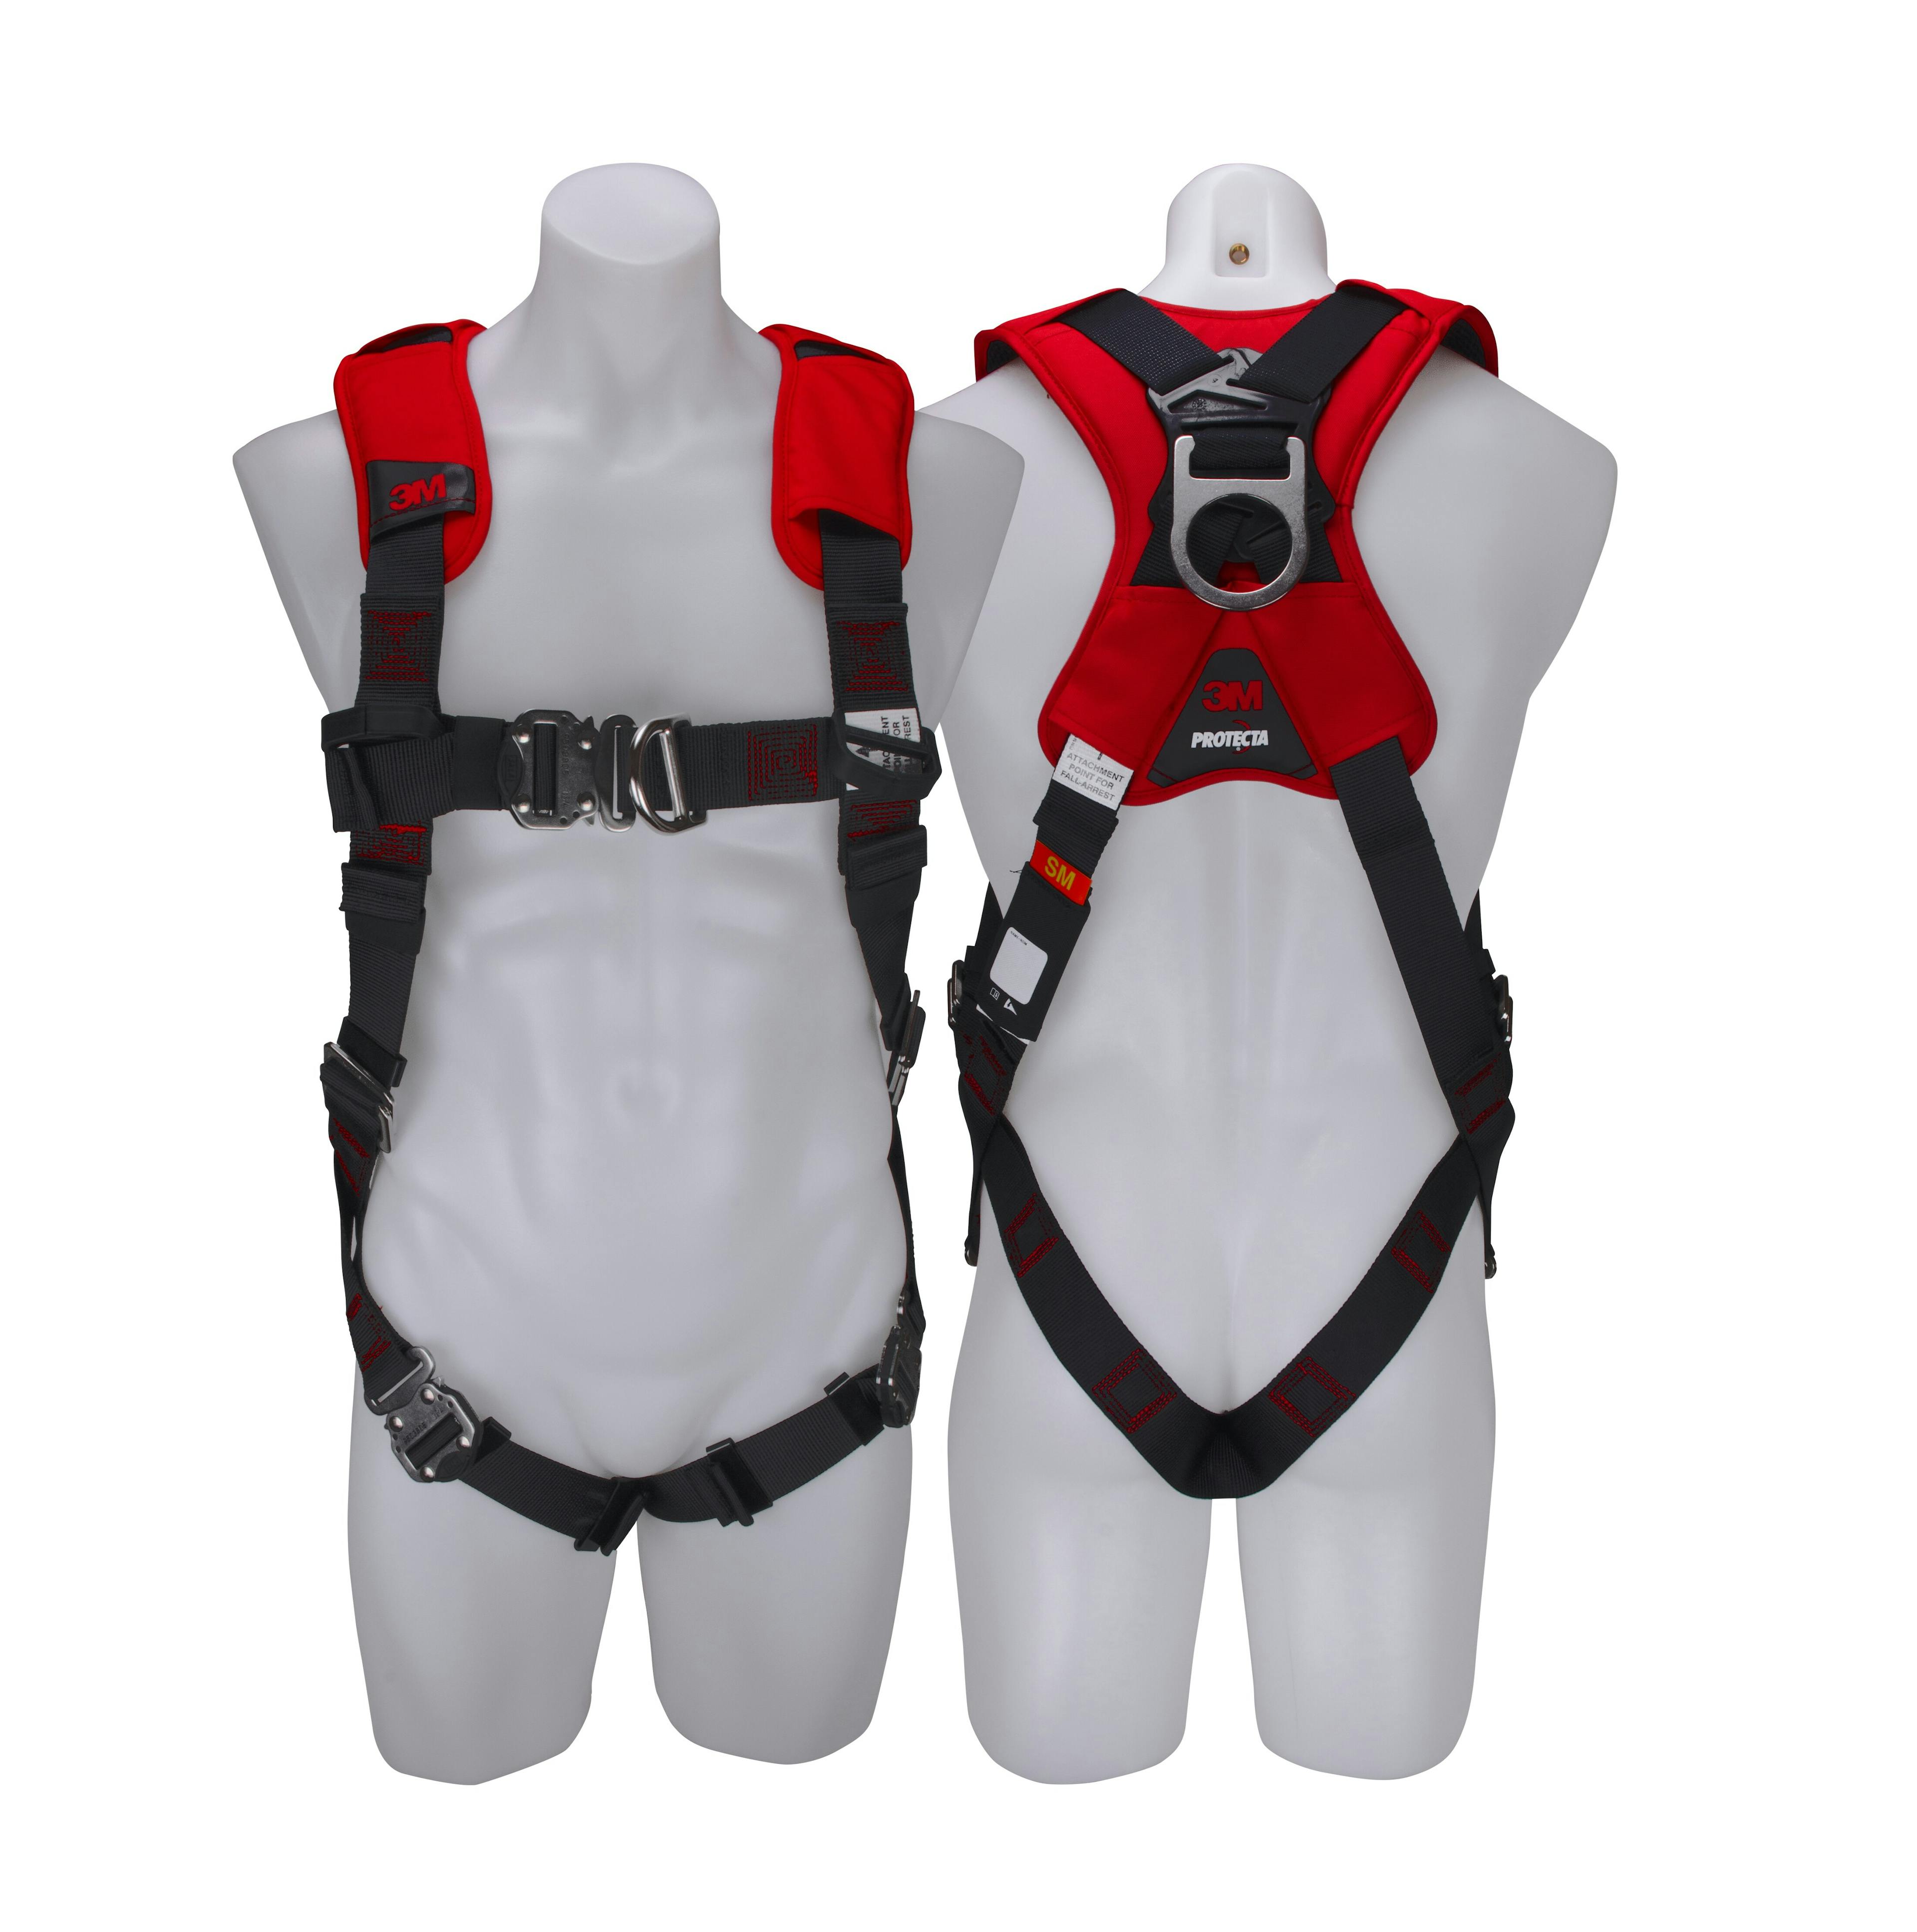 3M™ PROTECTA® X Riggers Harness with Stainless Steel and Padding 1161671, Red and Black, Extra Large, 1 EA/Case